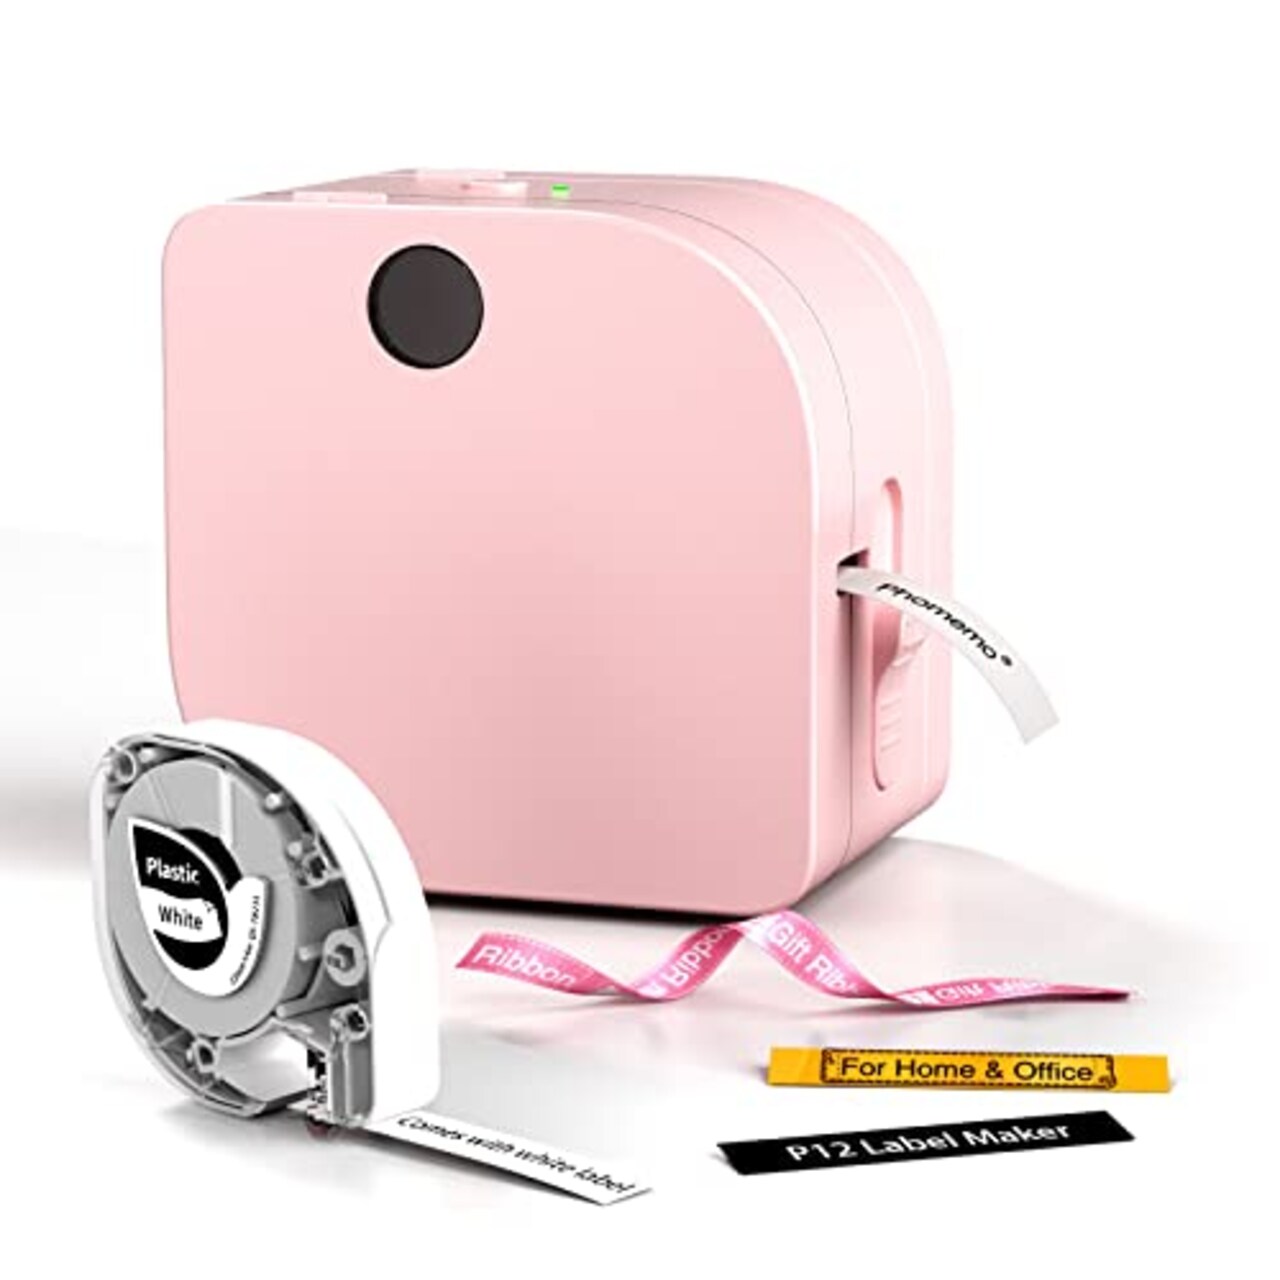 Phomemo Label Makers - Label Maker Machine with Tape P12, Bluetooth Label  Maker for Home Organization, Mini Label Printer with Tape 12mm x 4m,  Sticker Maker Support Color Printing and Font, with